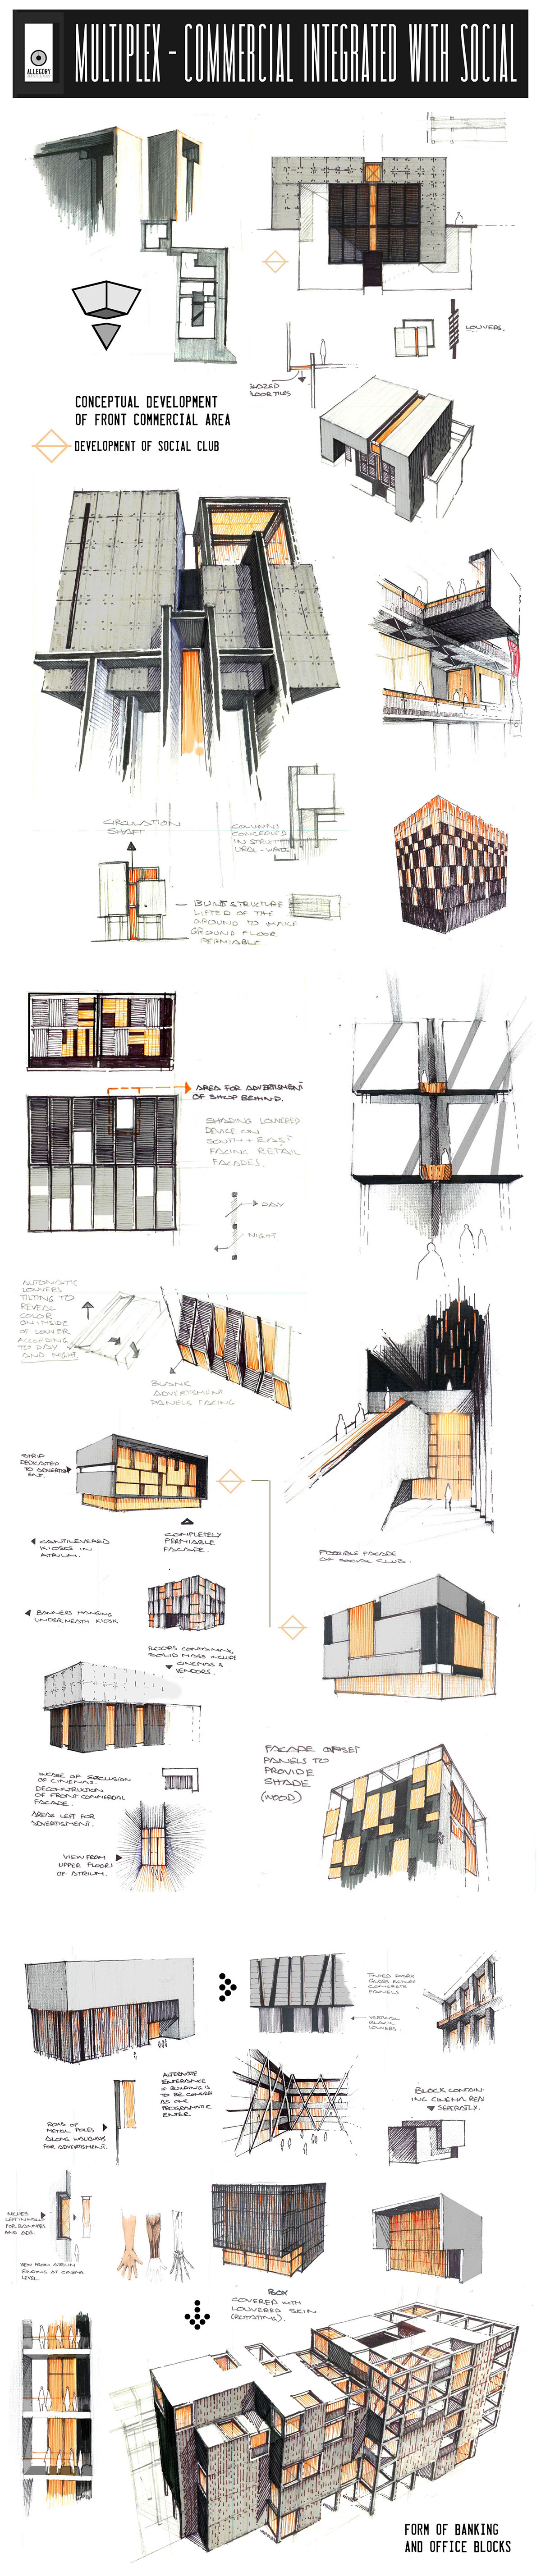 Multiplex industrial arch Proposal design illustrate commercial social concrete sketching